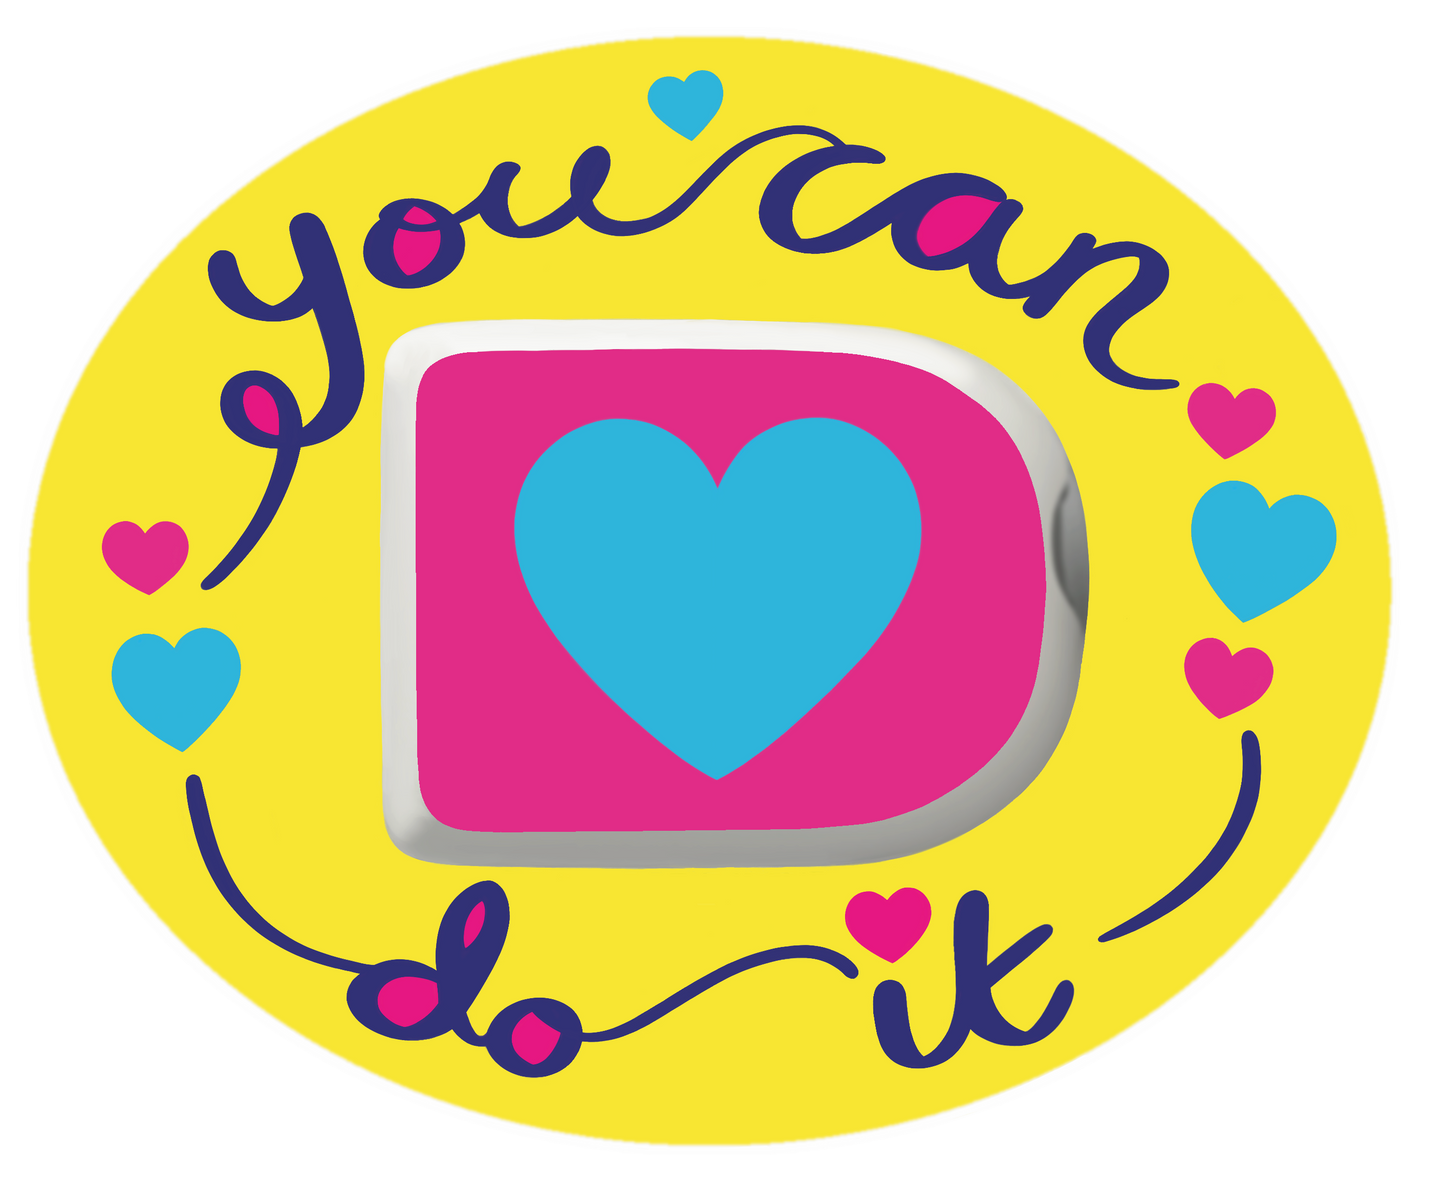 You Can Do It Stickers